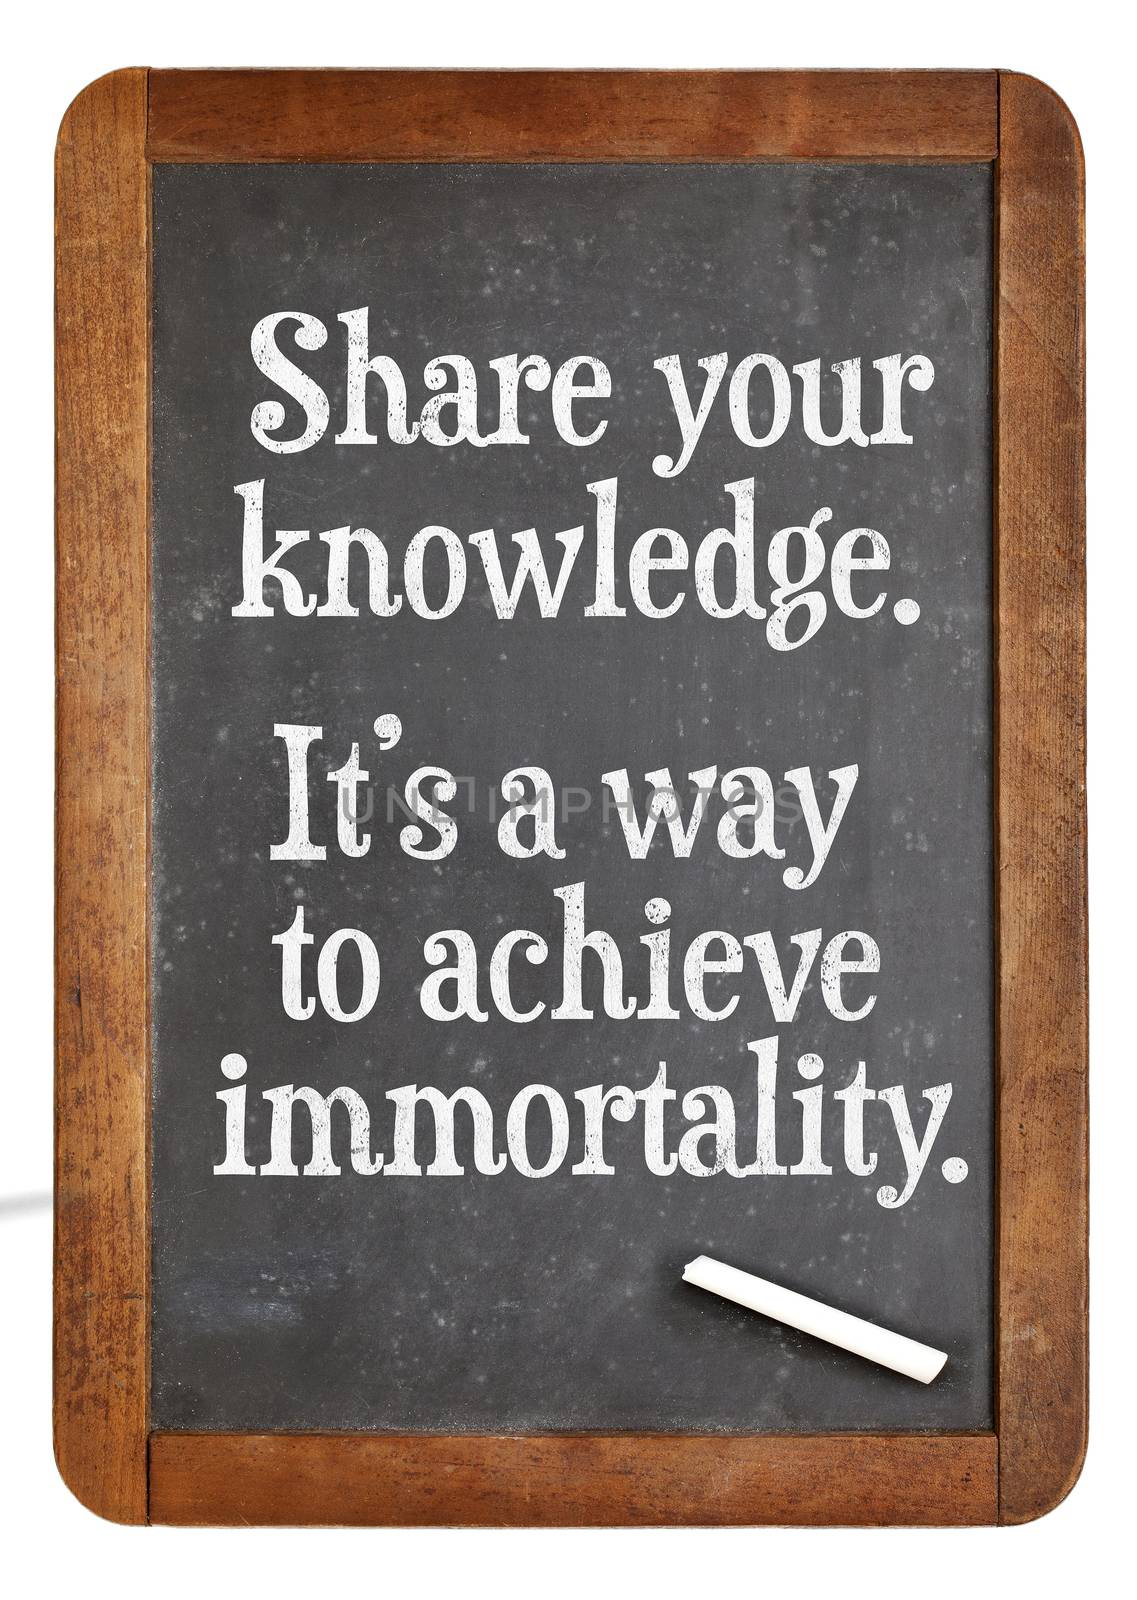 Share knowledge. It's a way to achieve immortality. Inspirational words on a vintage slate blackboard